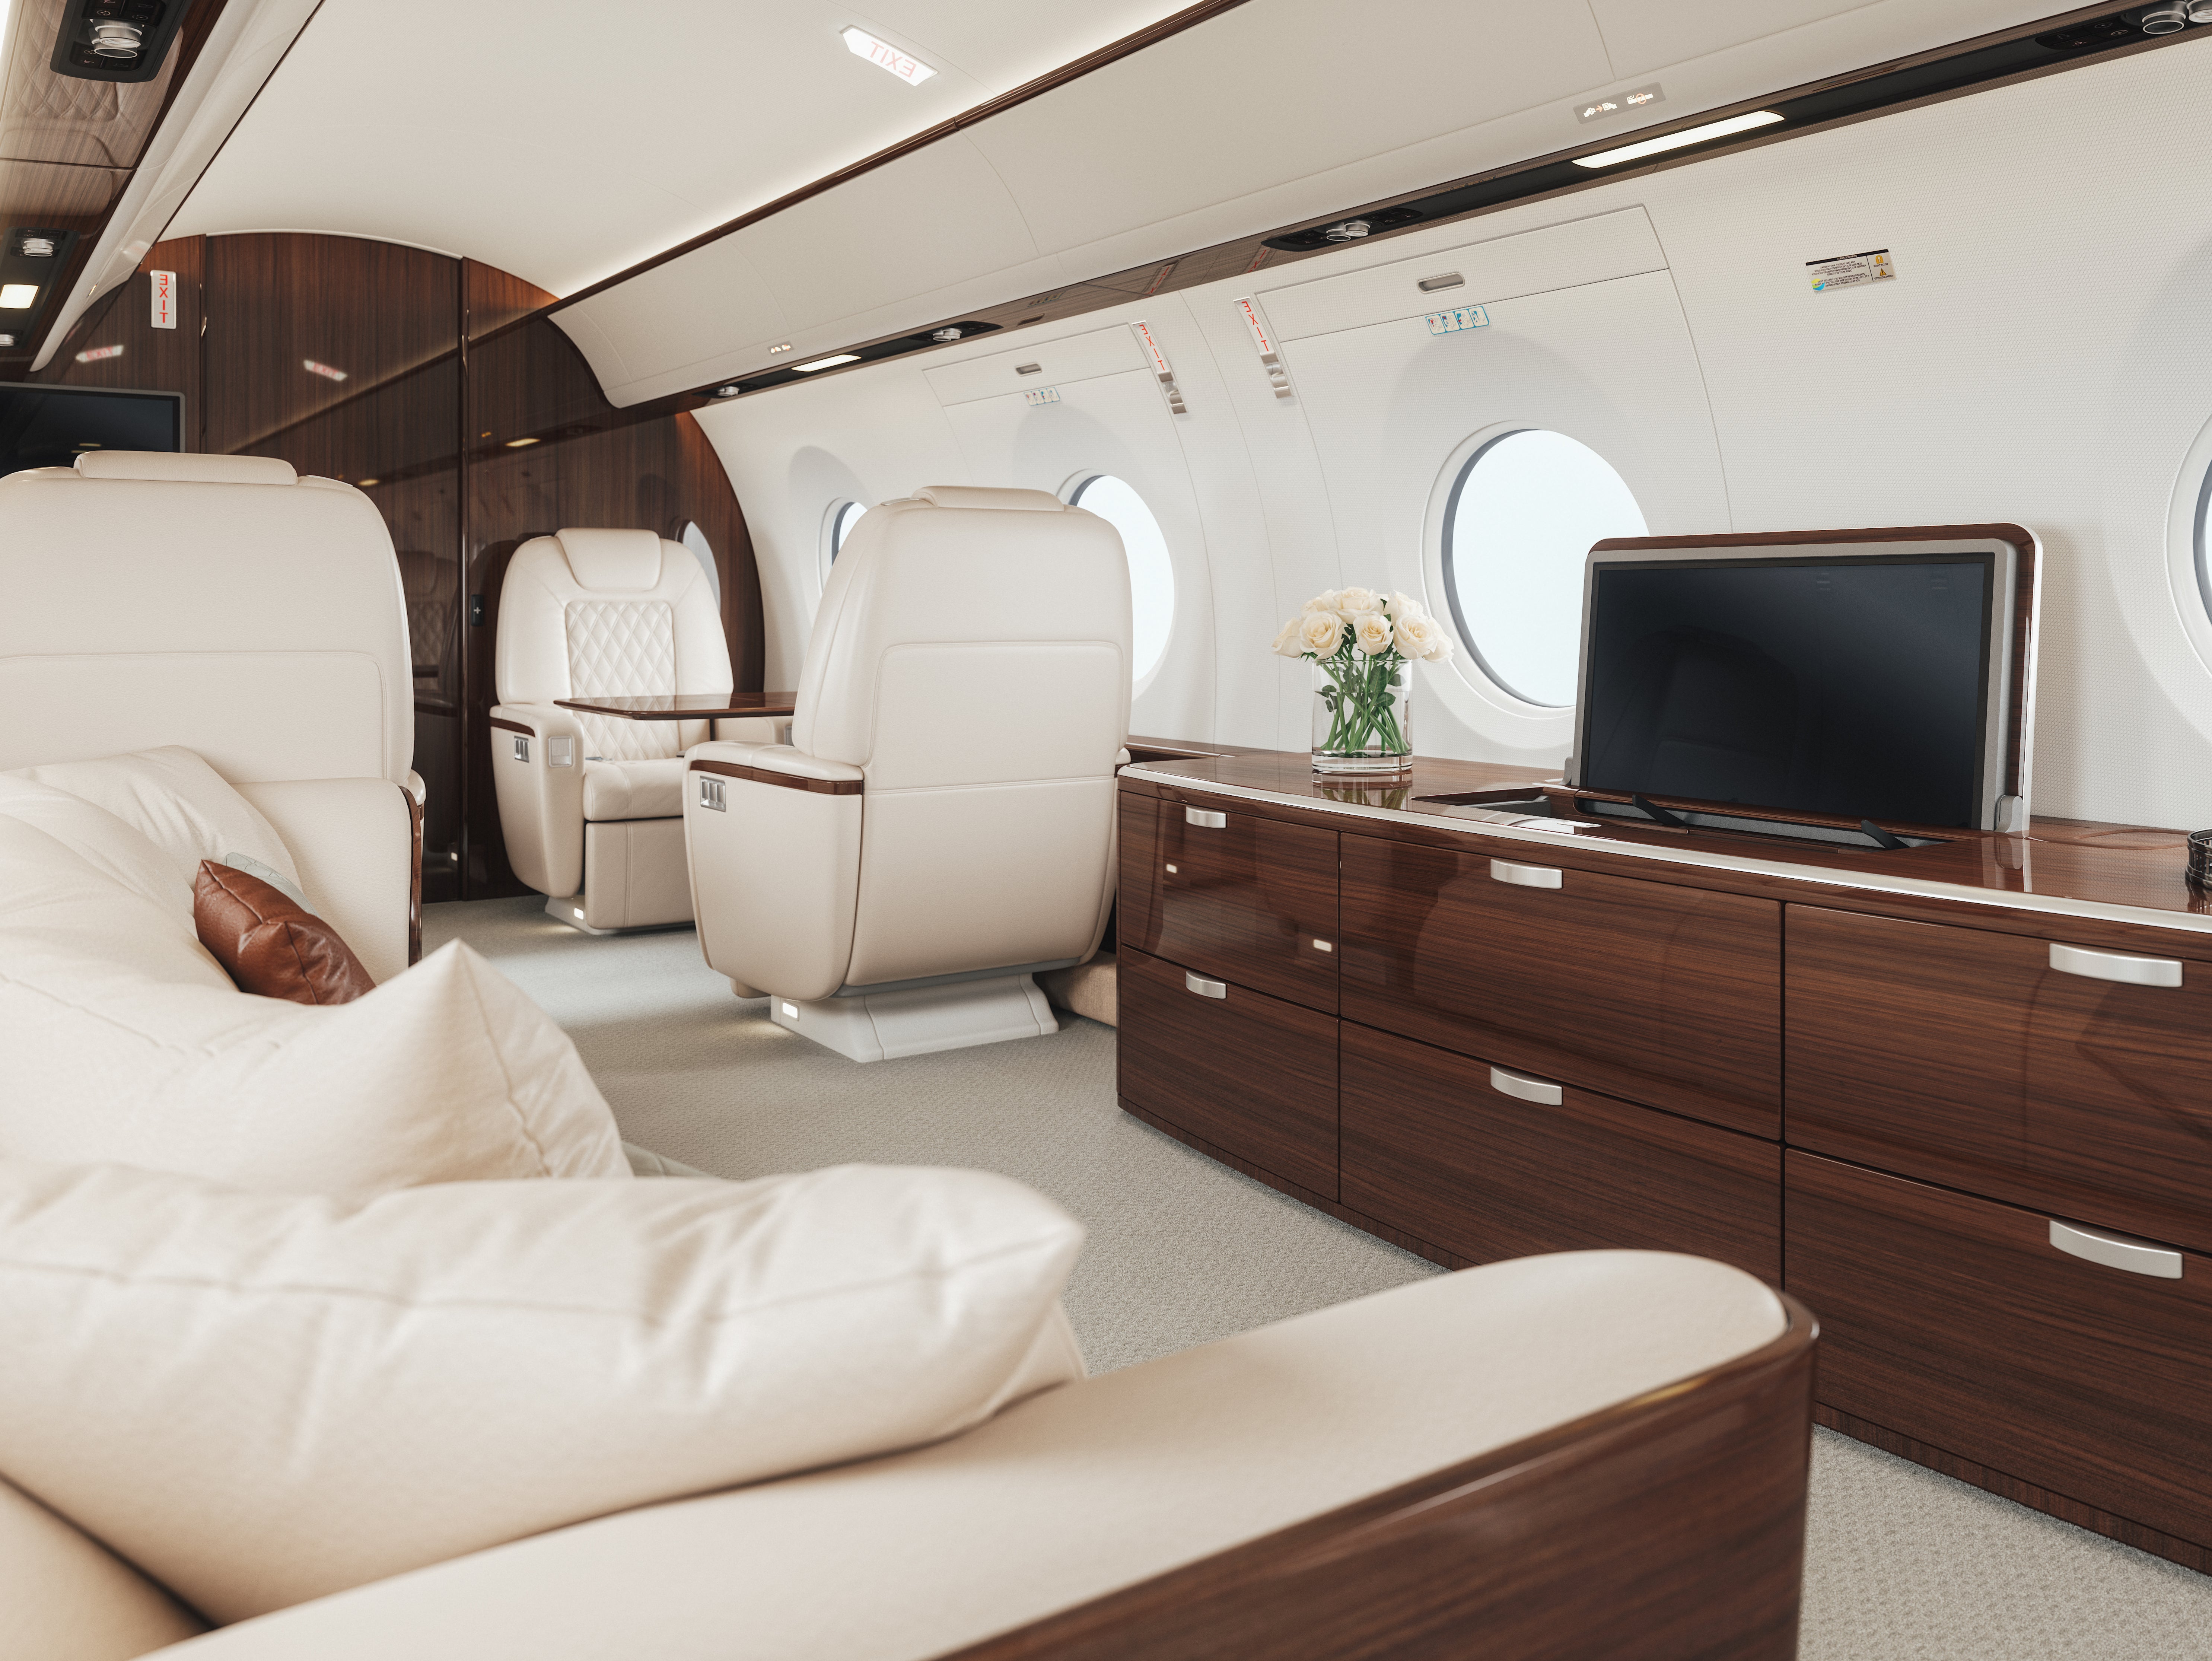 More than 570,000 private jet flights were made in Europe last year